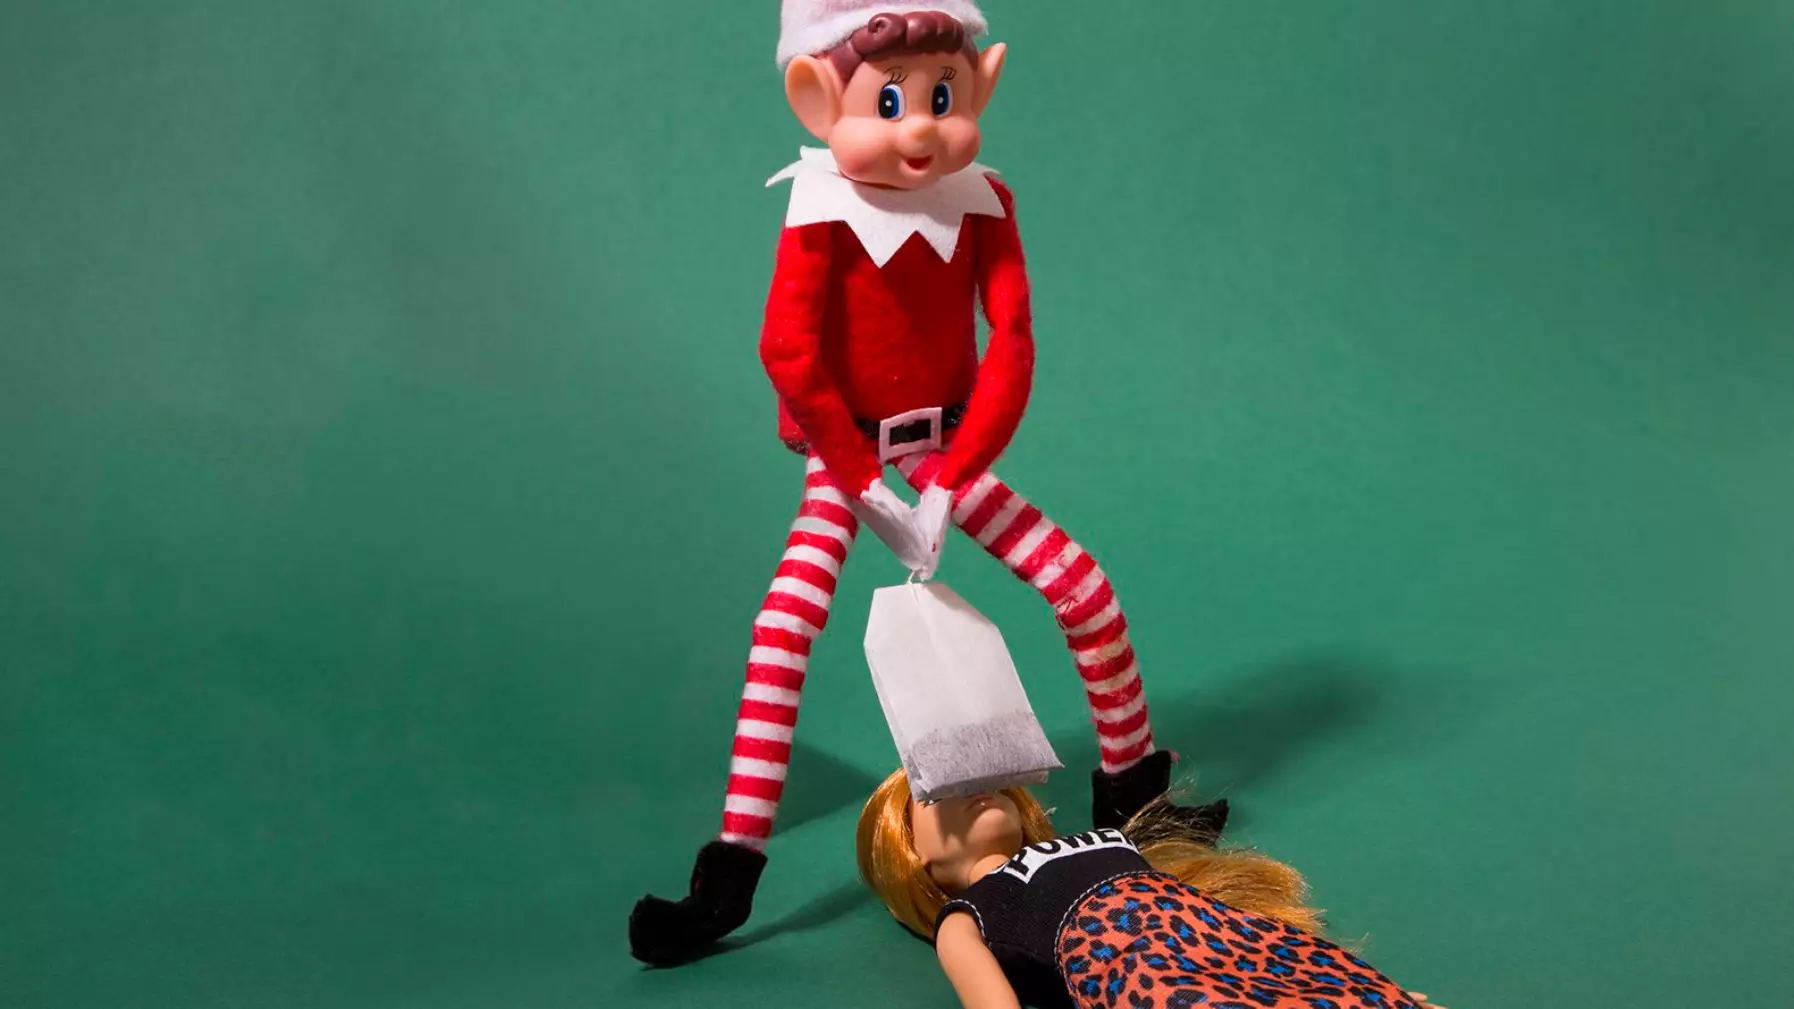 Poundland Investigated Over Naughty Christmas Elf Ad Campaign